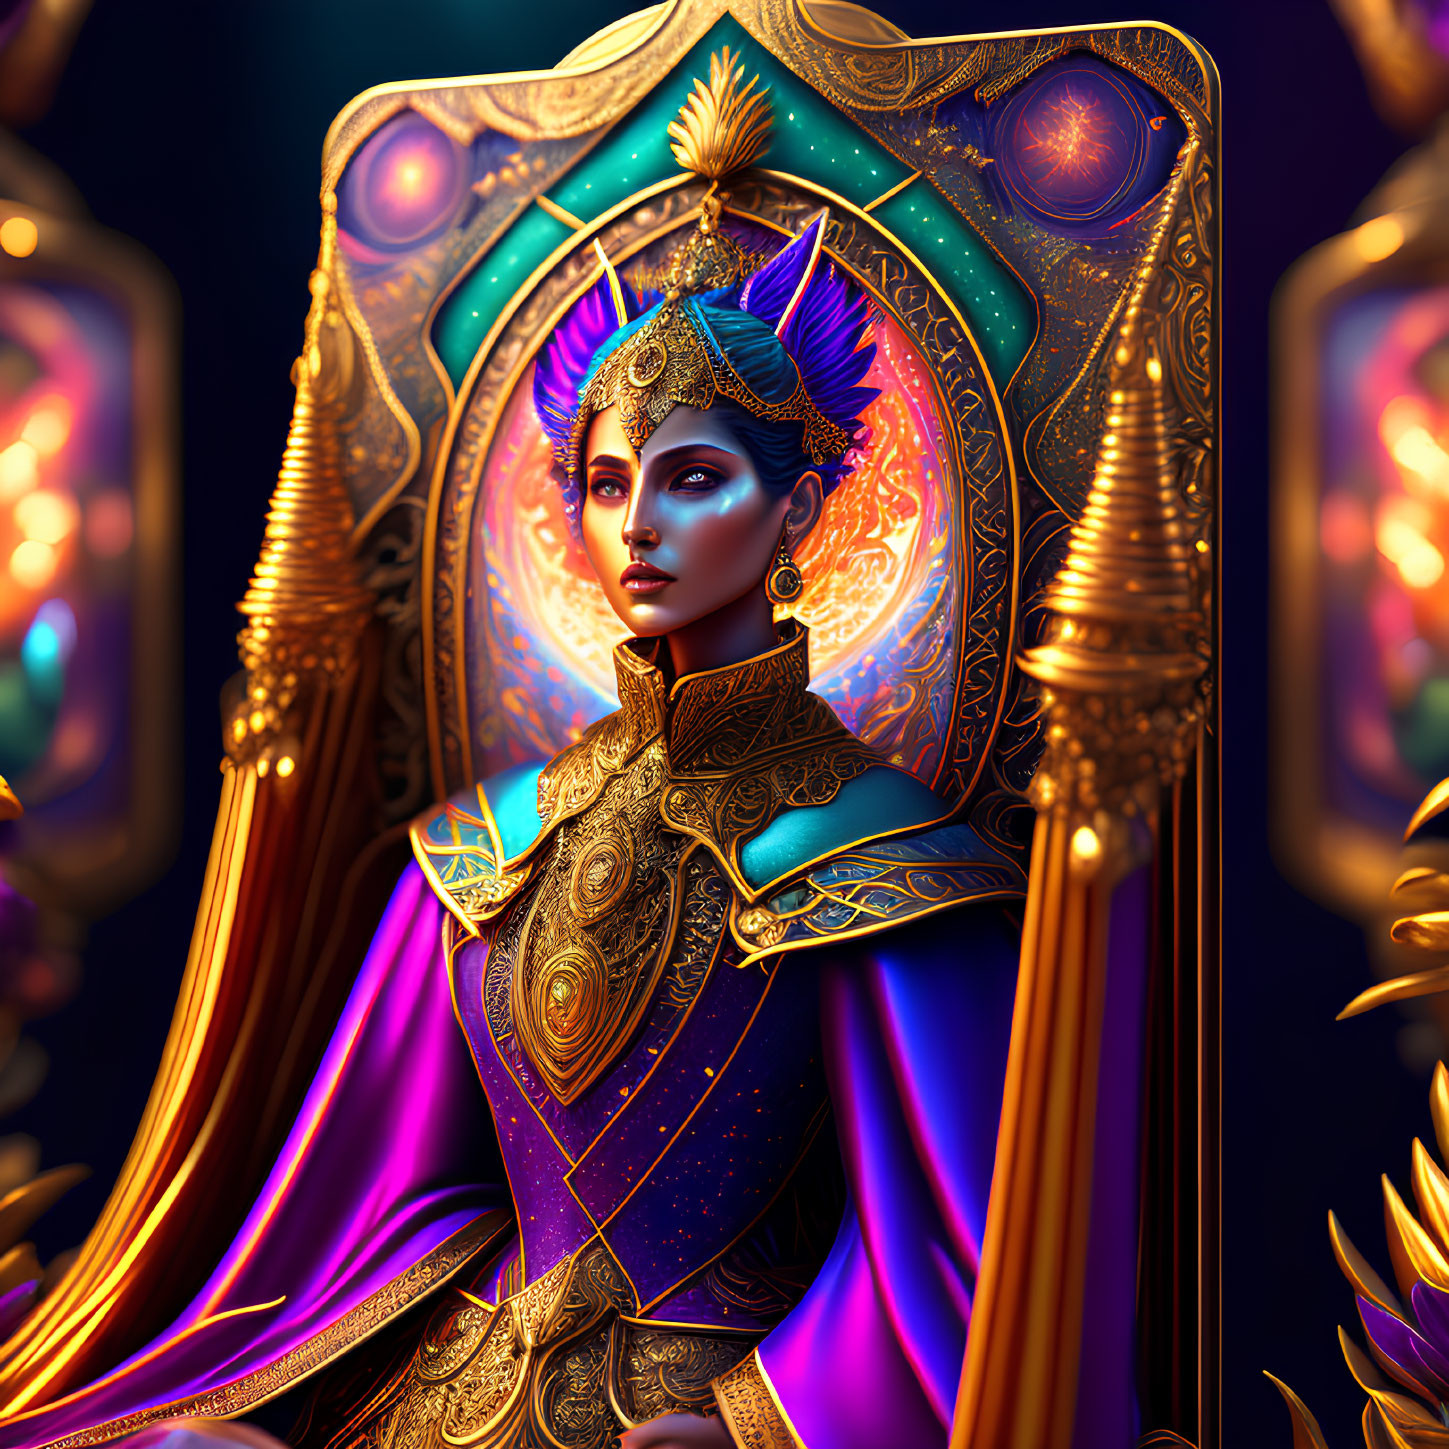 Regal woman on playing card with golden jewelry and purple cloak